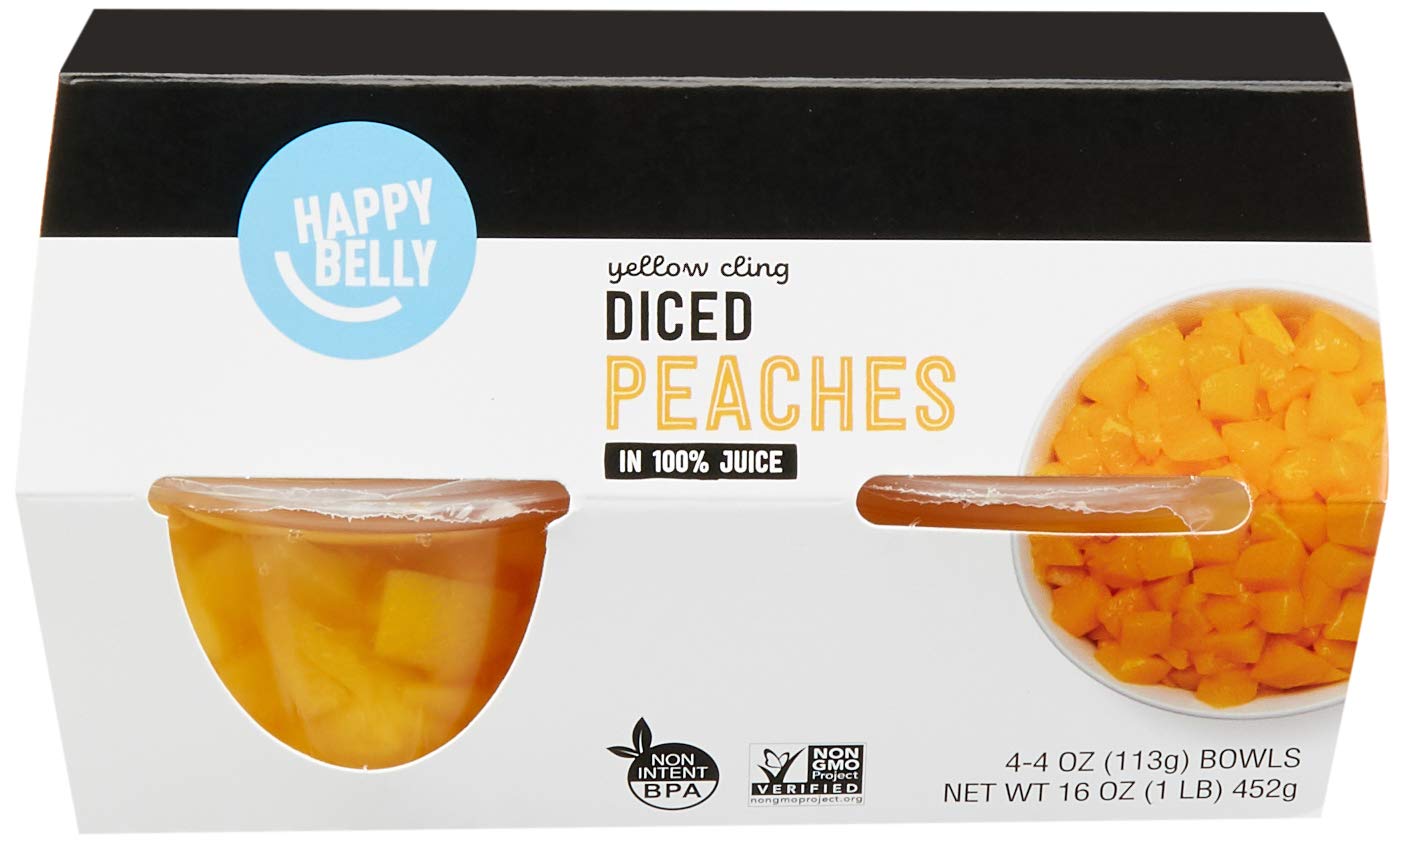 Happy Belly Diced Peach Or Pear Bowls 4 Packs $2 @ Amazon